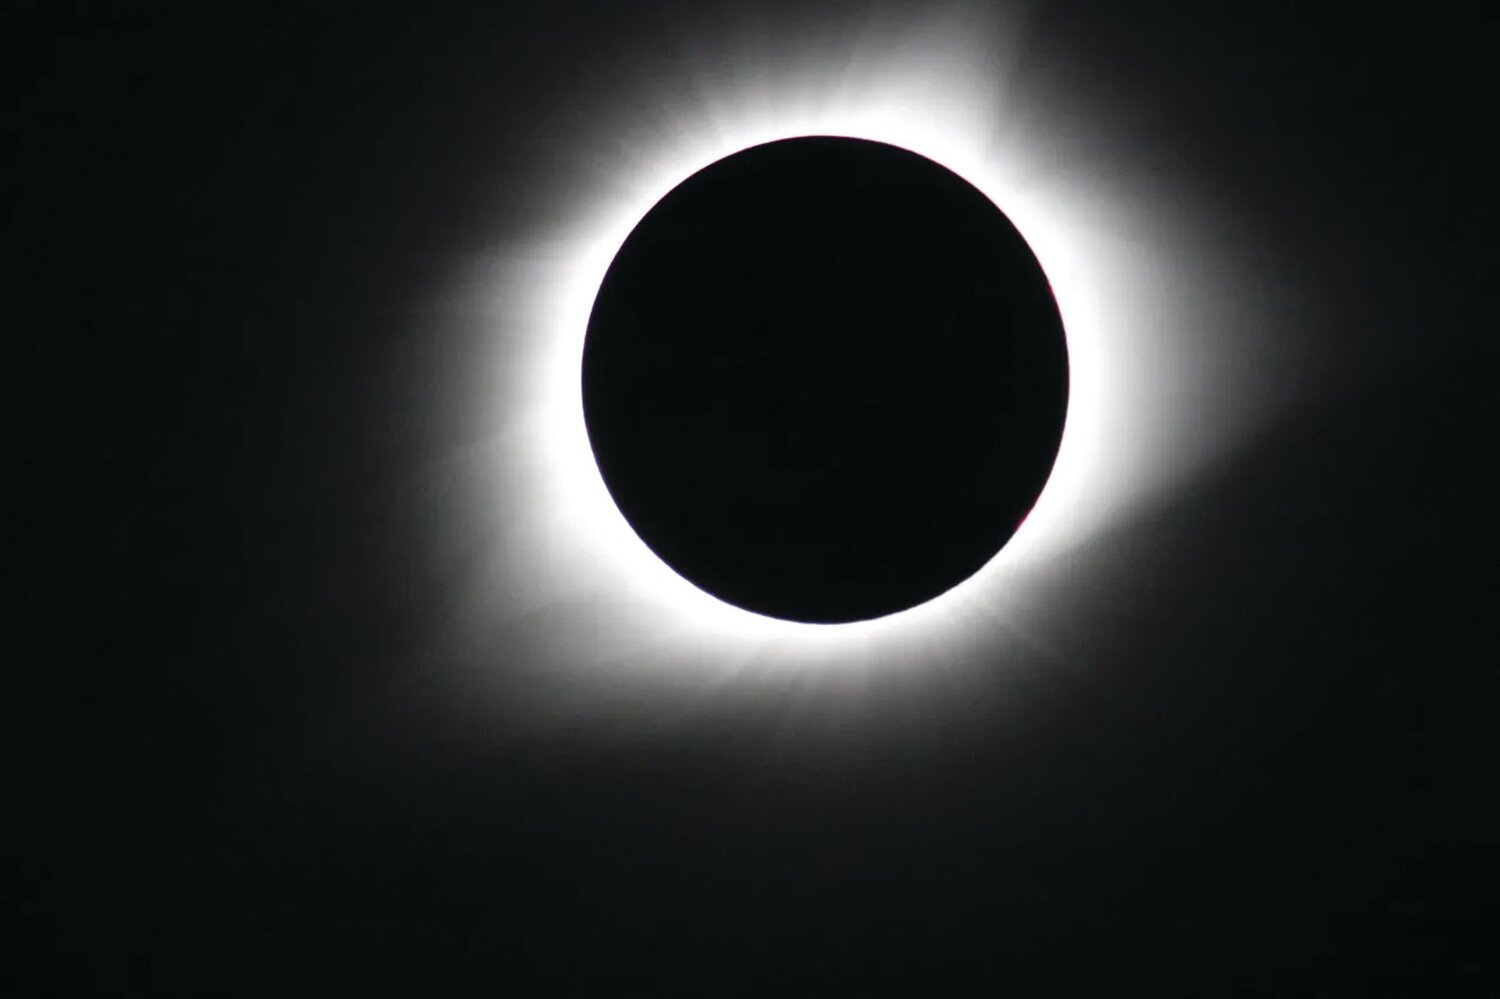 A view of the August 2017, total solar eclipse from Madras, Ore., showing ghostly white corona of the sun when the moon completely blocks the sun’s disk.